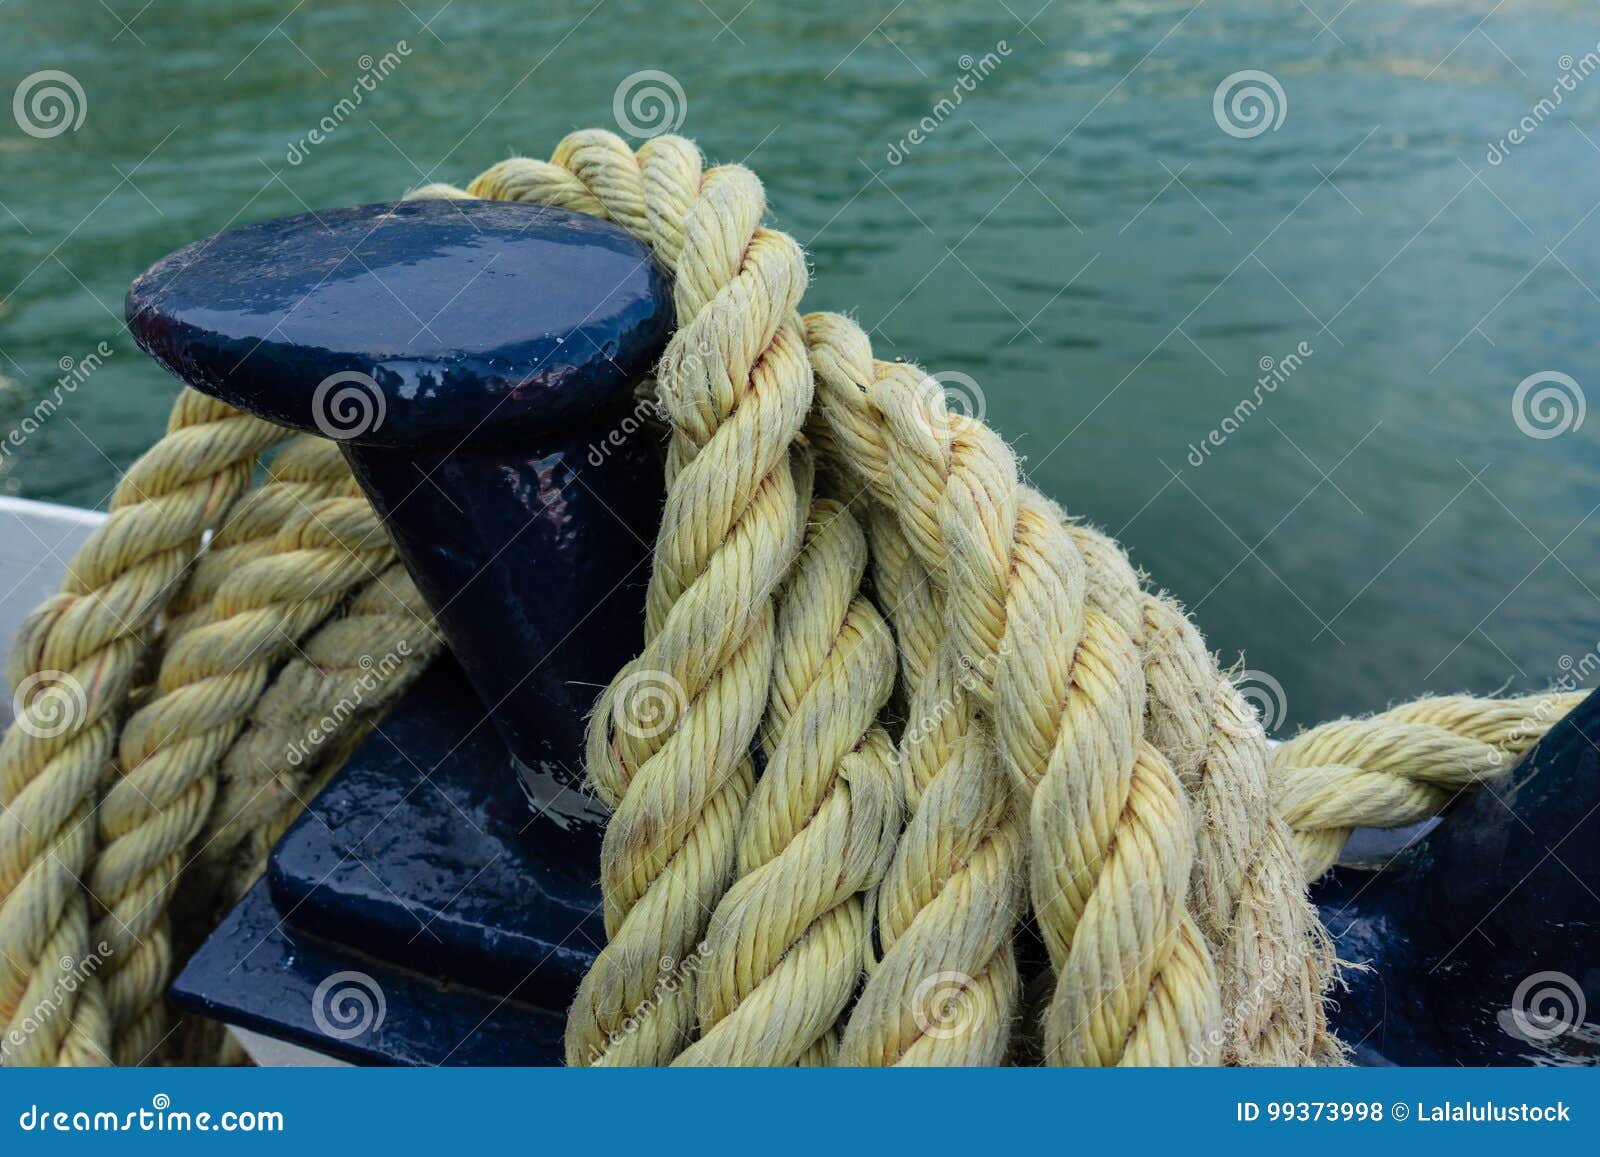 https://thumbs.dreamstime.com/z/closeup-old-yellow-frayed-boat-rope-water-background-landscape-close-up-99373998.jpg